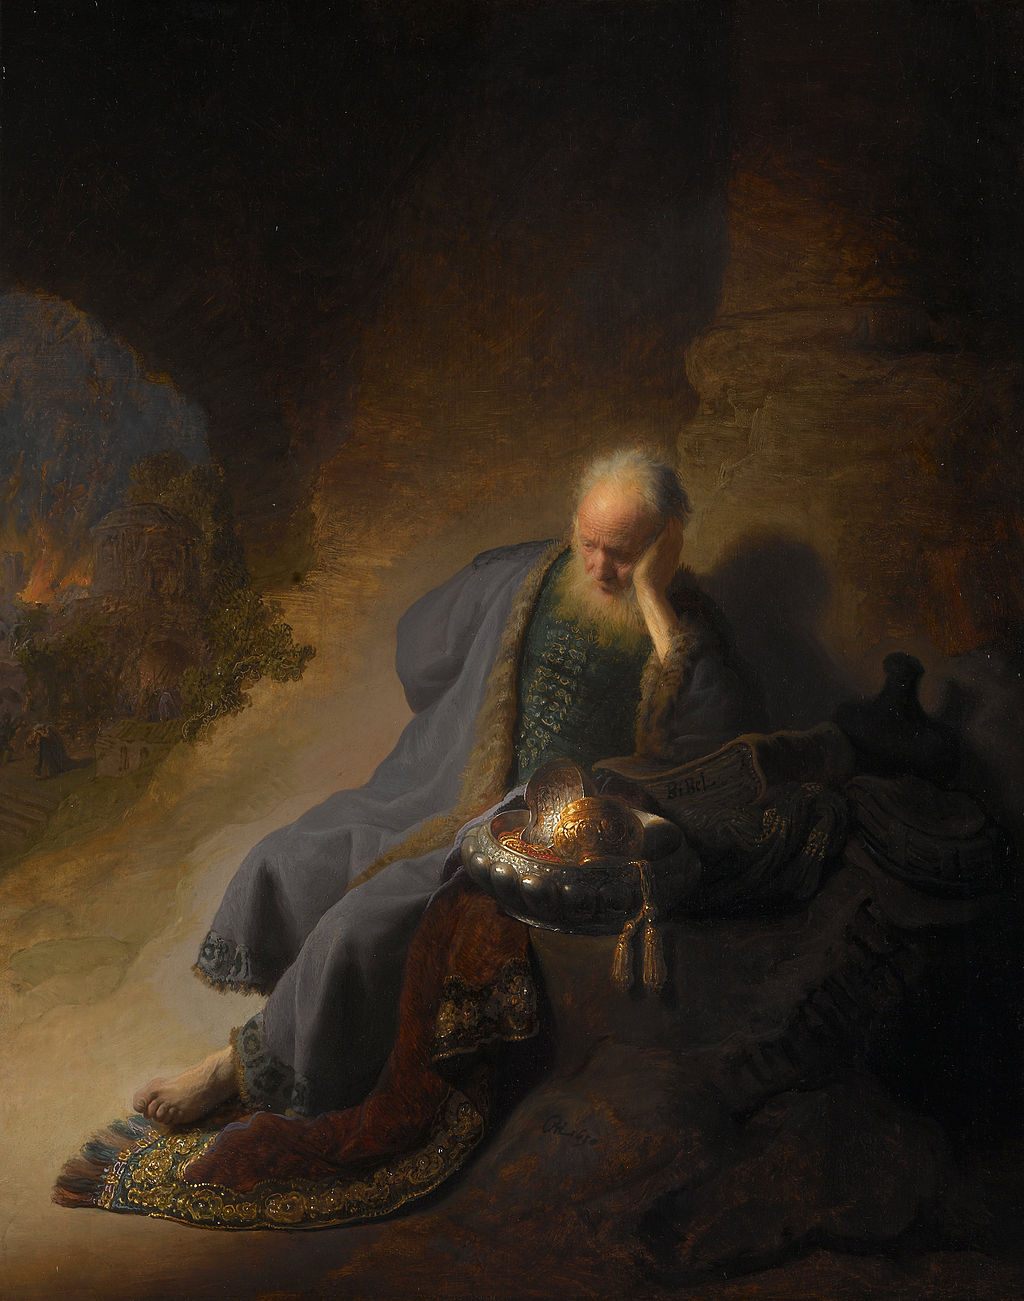 Jeremiah Lamenting the Destruction of Jerusalem Painting by Rembrandt Oil on Canvas Reproduction by Blue Surf Art